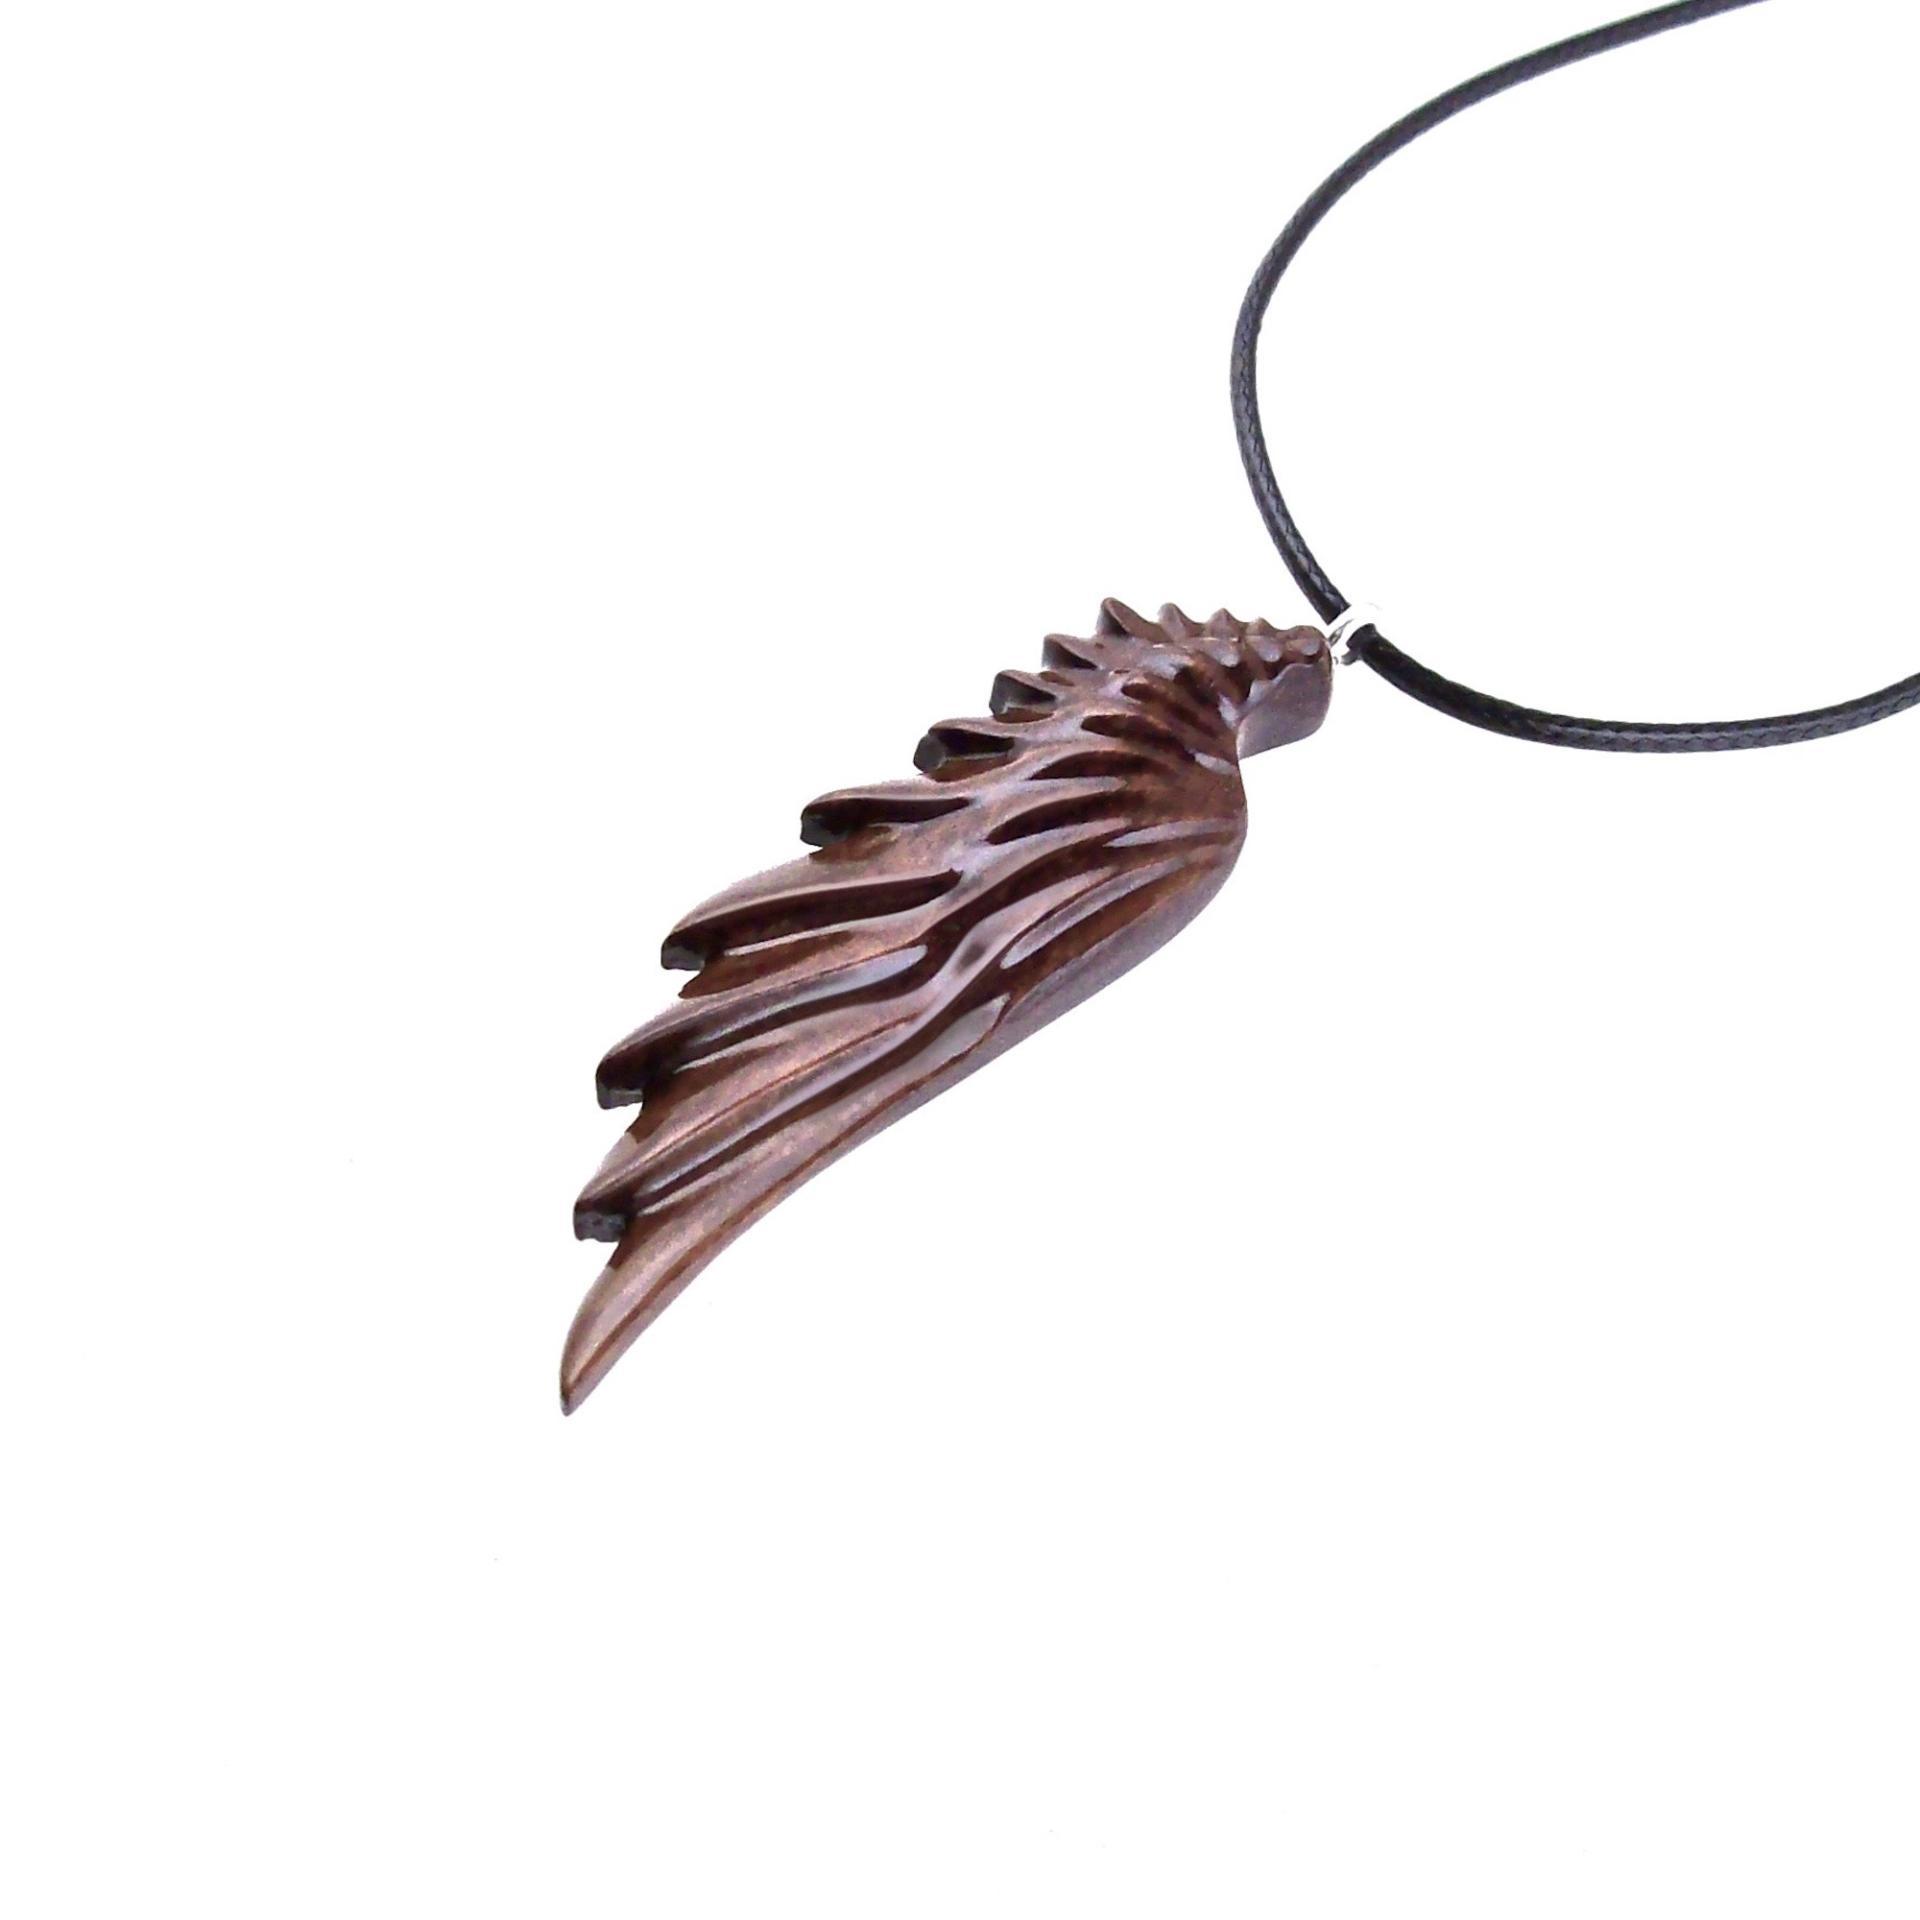 Wooden Angel Wing Pendant Necklace, Hand Carved Protection Amulet Gift for Him, One of a Kind Christian Wood Jewelry